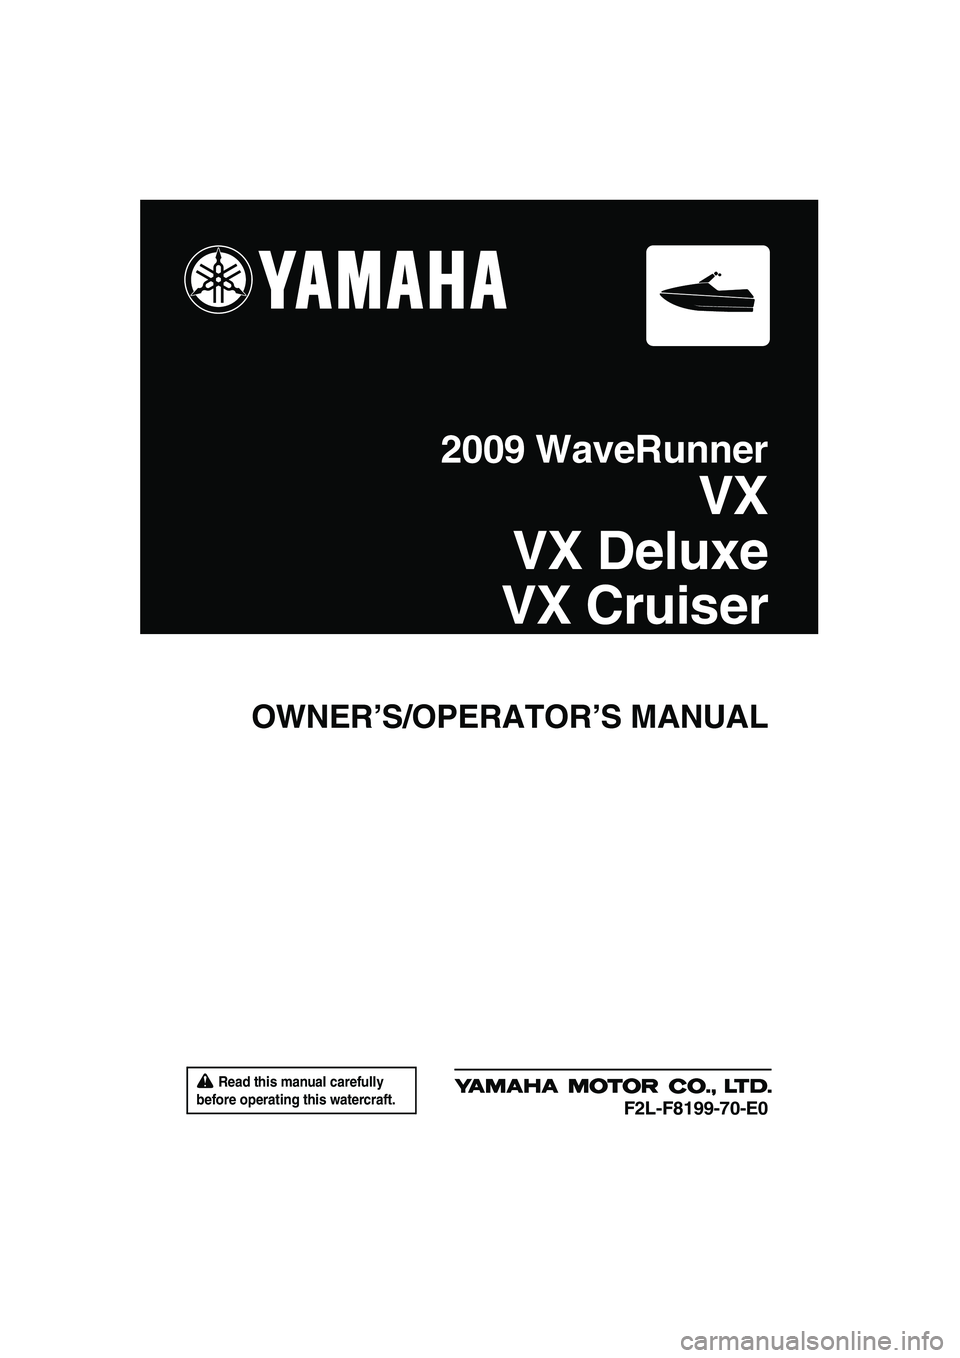 YAMAHA VX SPORT 2009  Owners Manual  Read this manual carefully 
before operating this watercraft.
OWNER’S/OPERATOR’S MANUAL
2009 WaveRunner
VX
VX Deluxe
VX Cruiser
F2L-F8199-70-E0
UF2L70E0.book  Page 1  Thursday, June 19, 2008  8:3